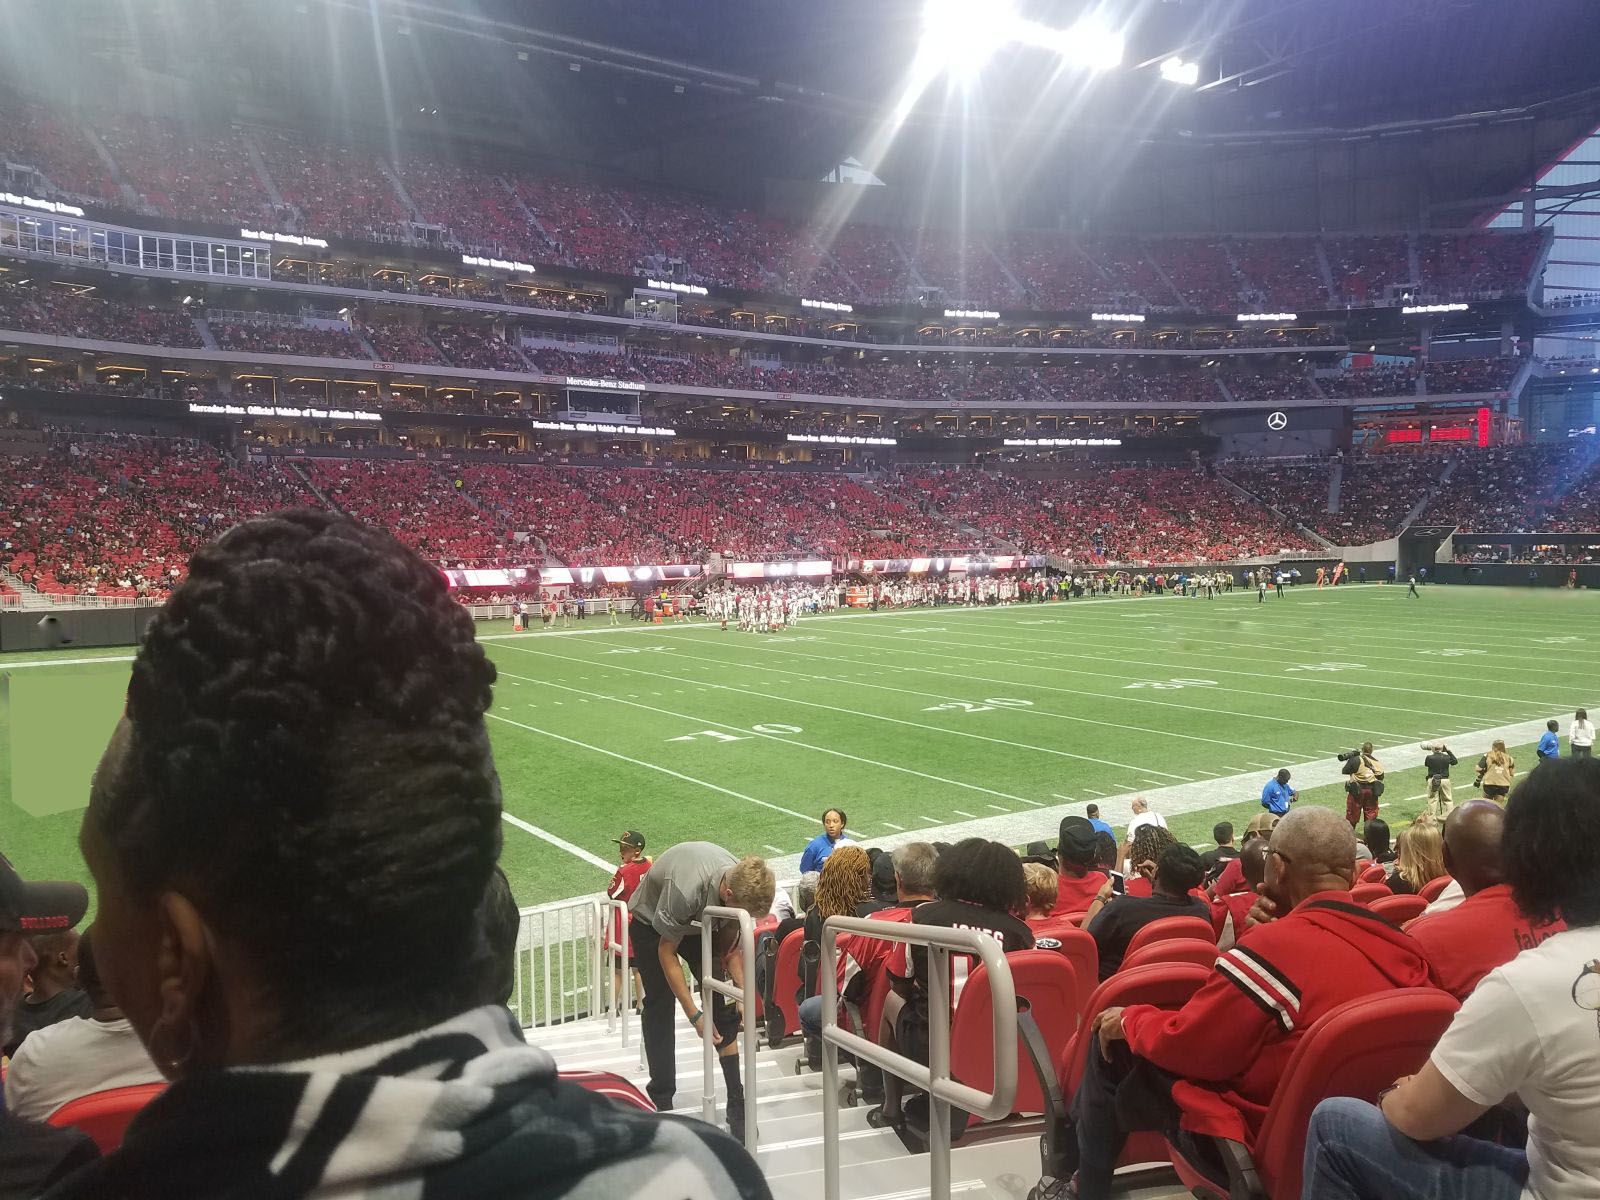 section 115, row 13 seat view  for football - mercedes-benz stadium